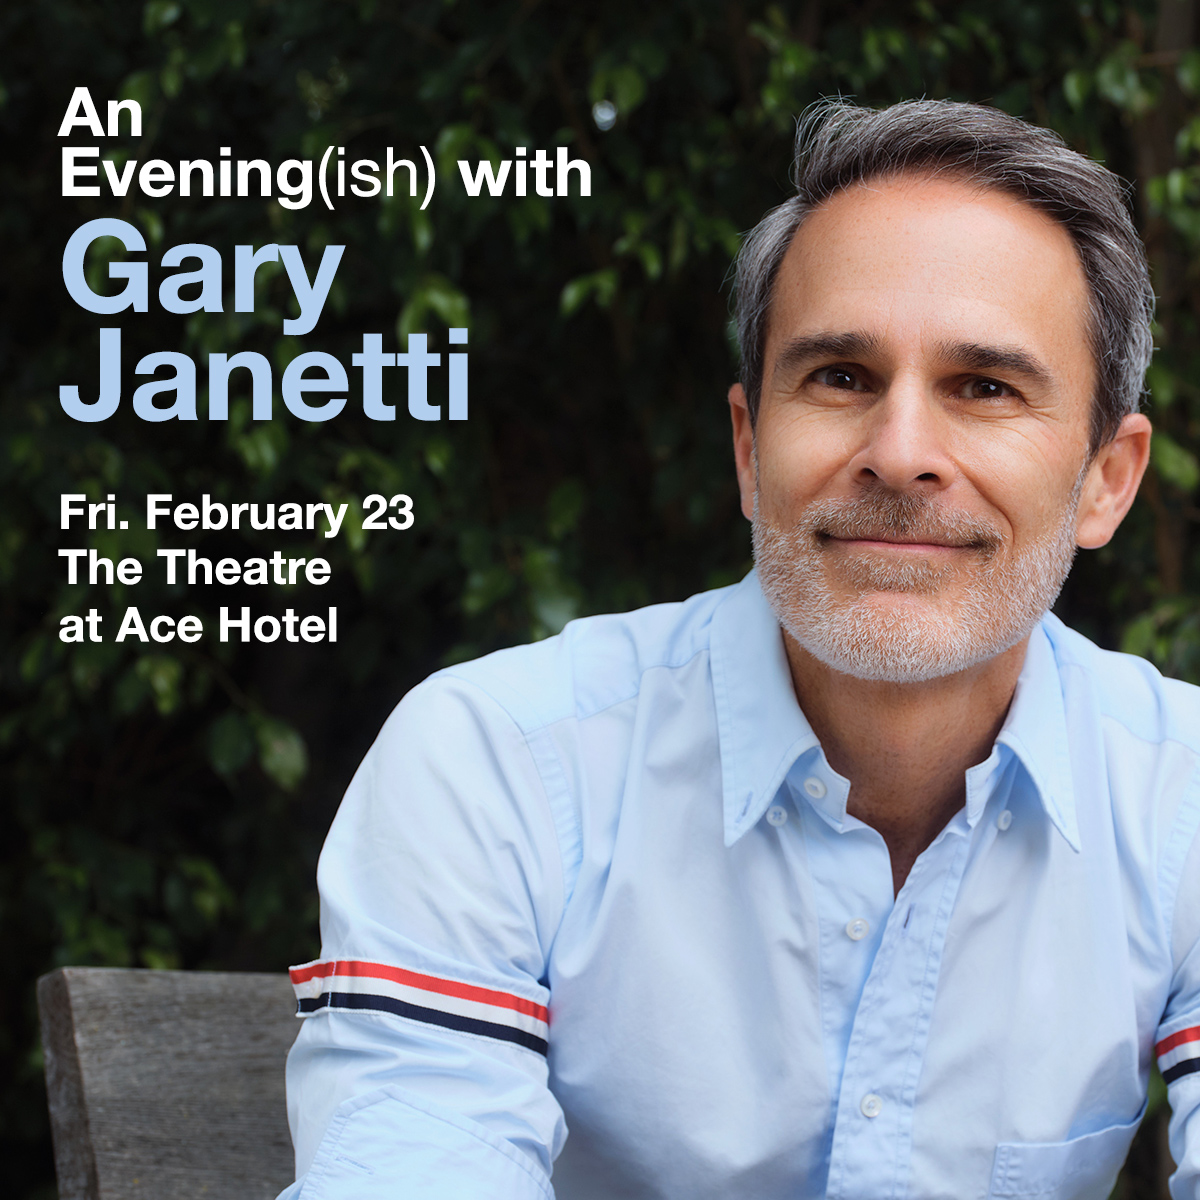 An Evening(ish) with Gary Janetti